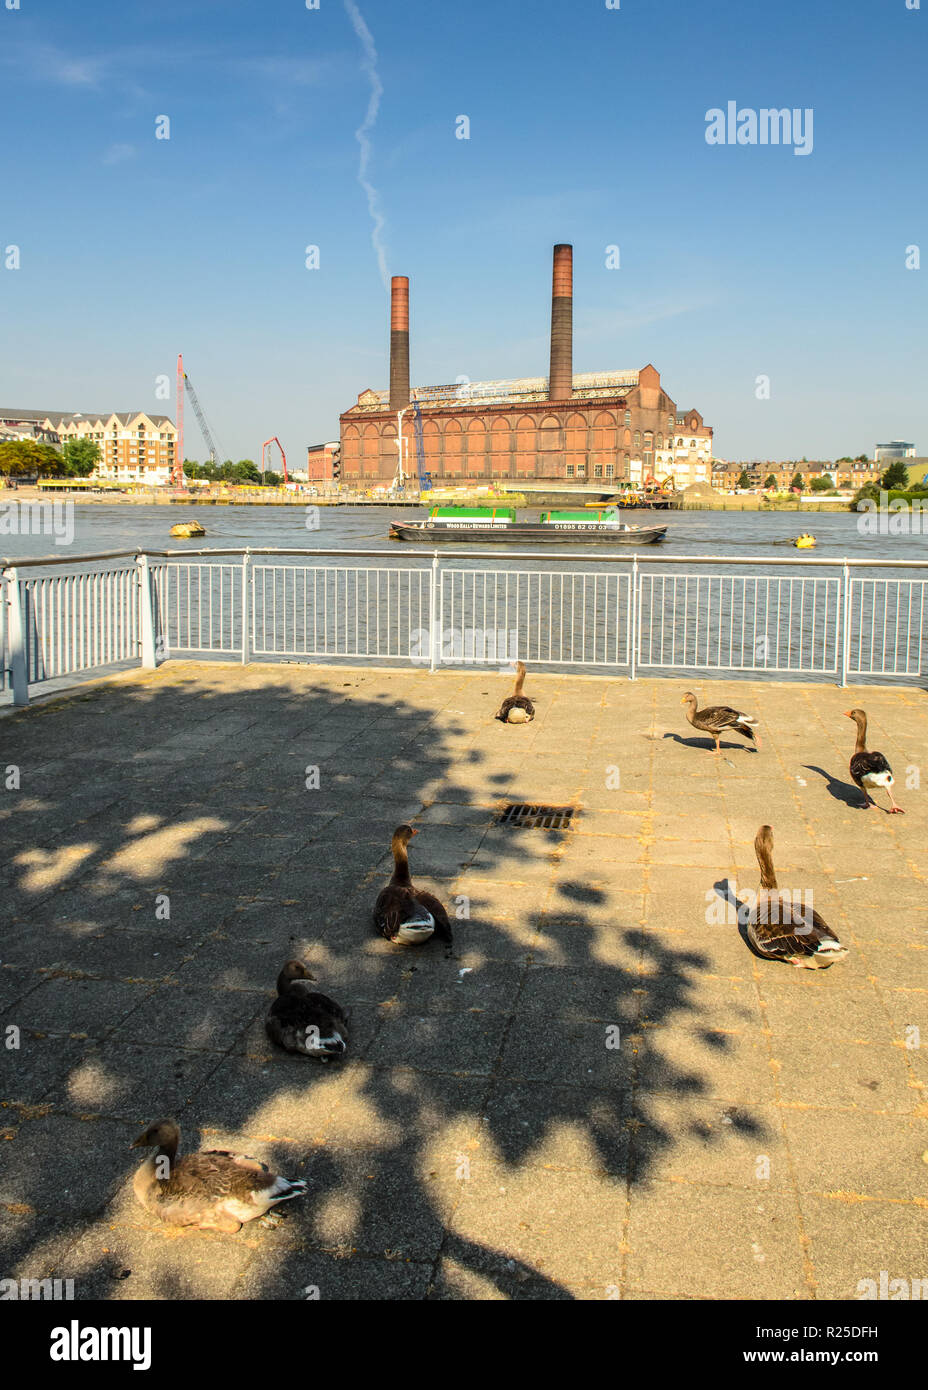 London, England, UK - July 18, 2013: A flock of geese sit in sunshine on the River Thames Path at Battersea in west London, with Chelsea's Lots Road P Stock Photo